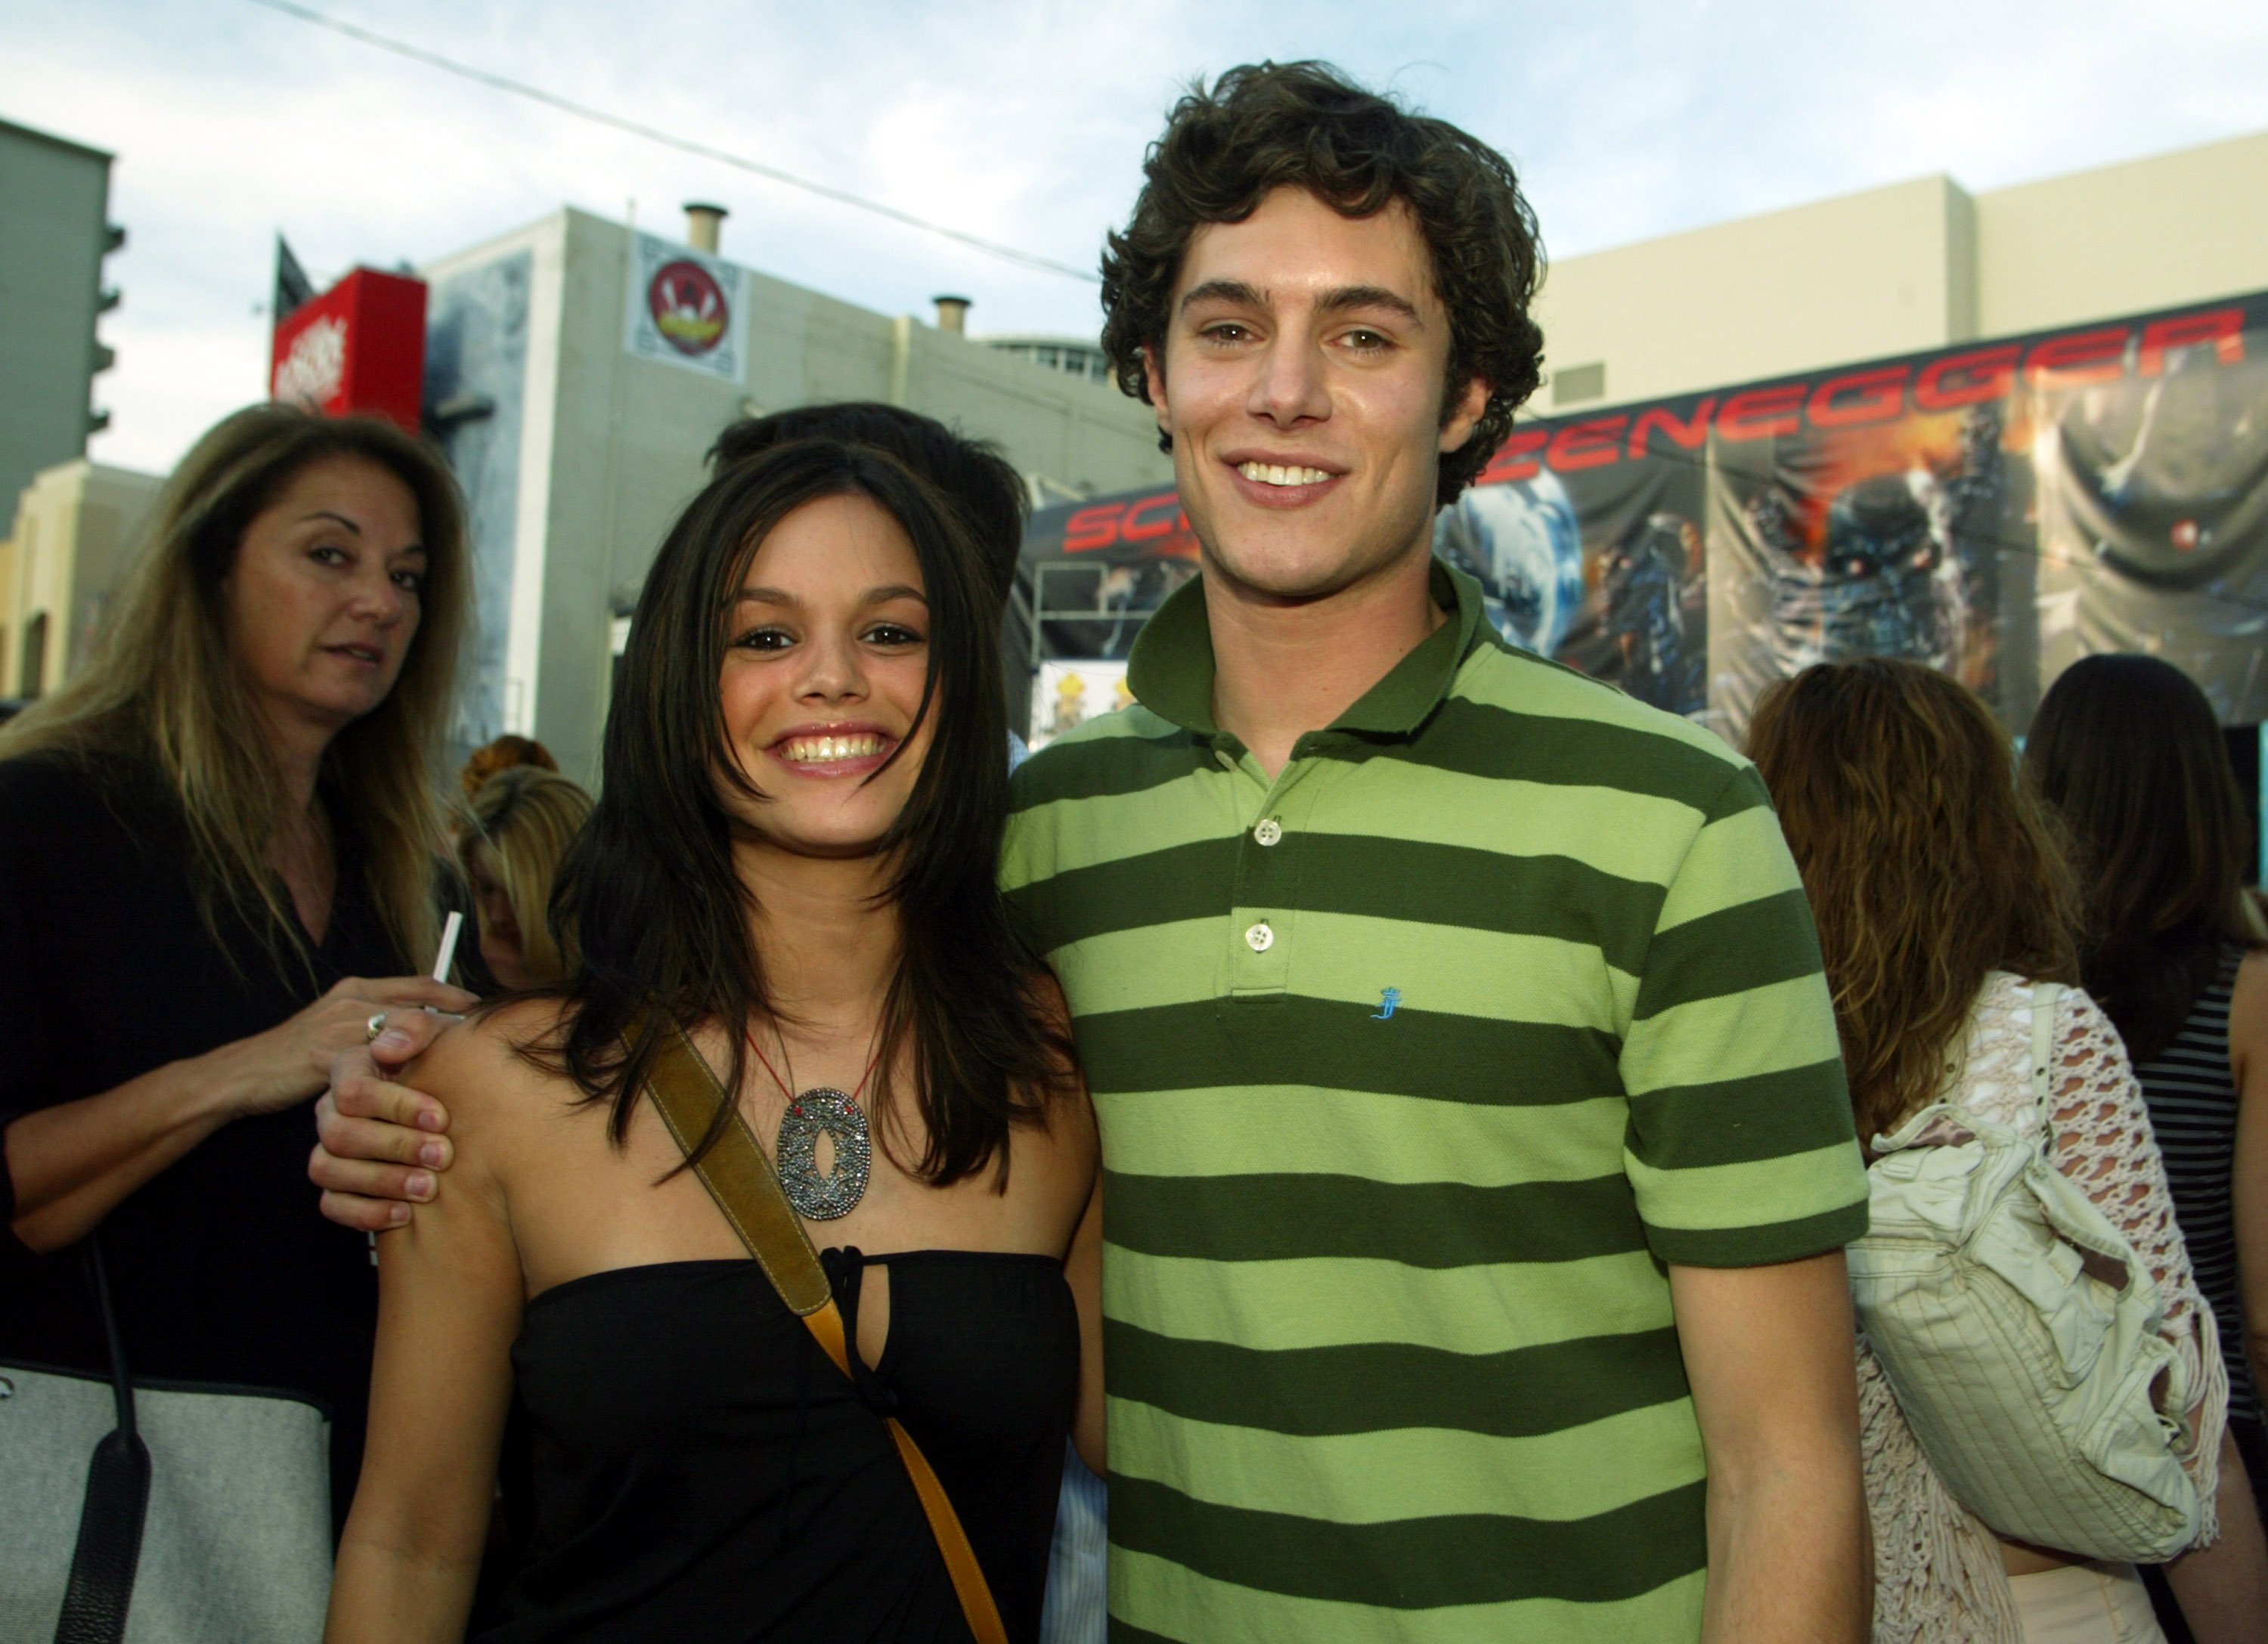 Rachel Bilson and Adam Brody on the red carpet in 2003